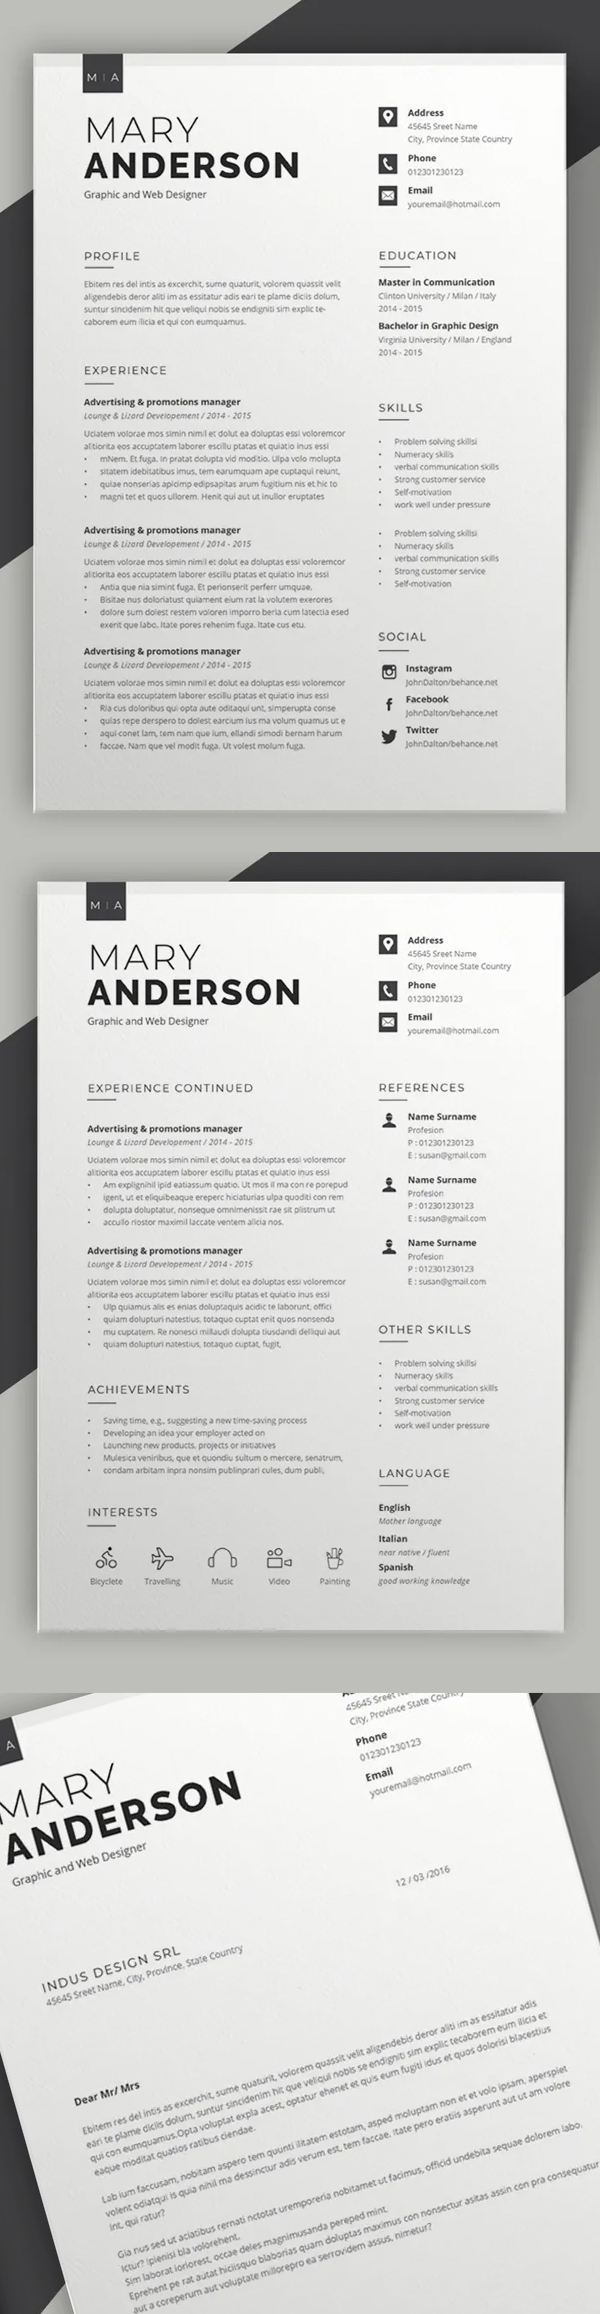 Resume 2 pages Resume + Cover Letter Font